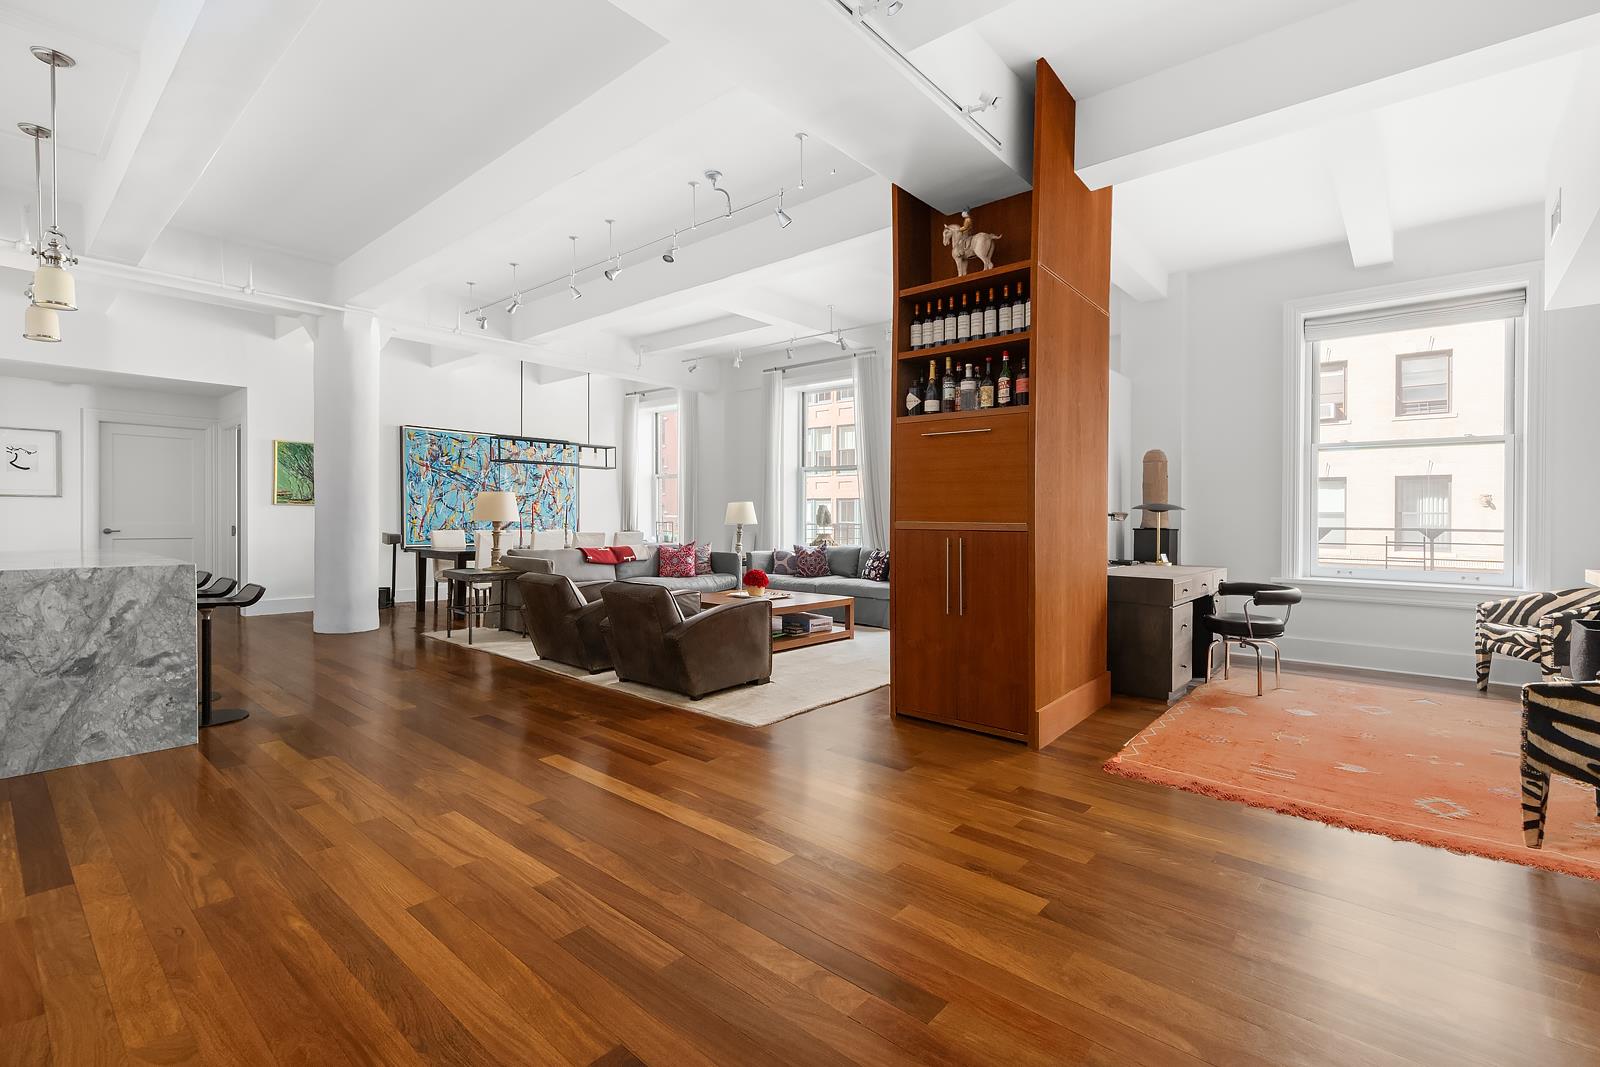 161 Hudson Street 2A, Tribeca, Downtown, NYC - 3 Bedrooms  
2.5 Bathrooms  
7 Rooms - 